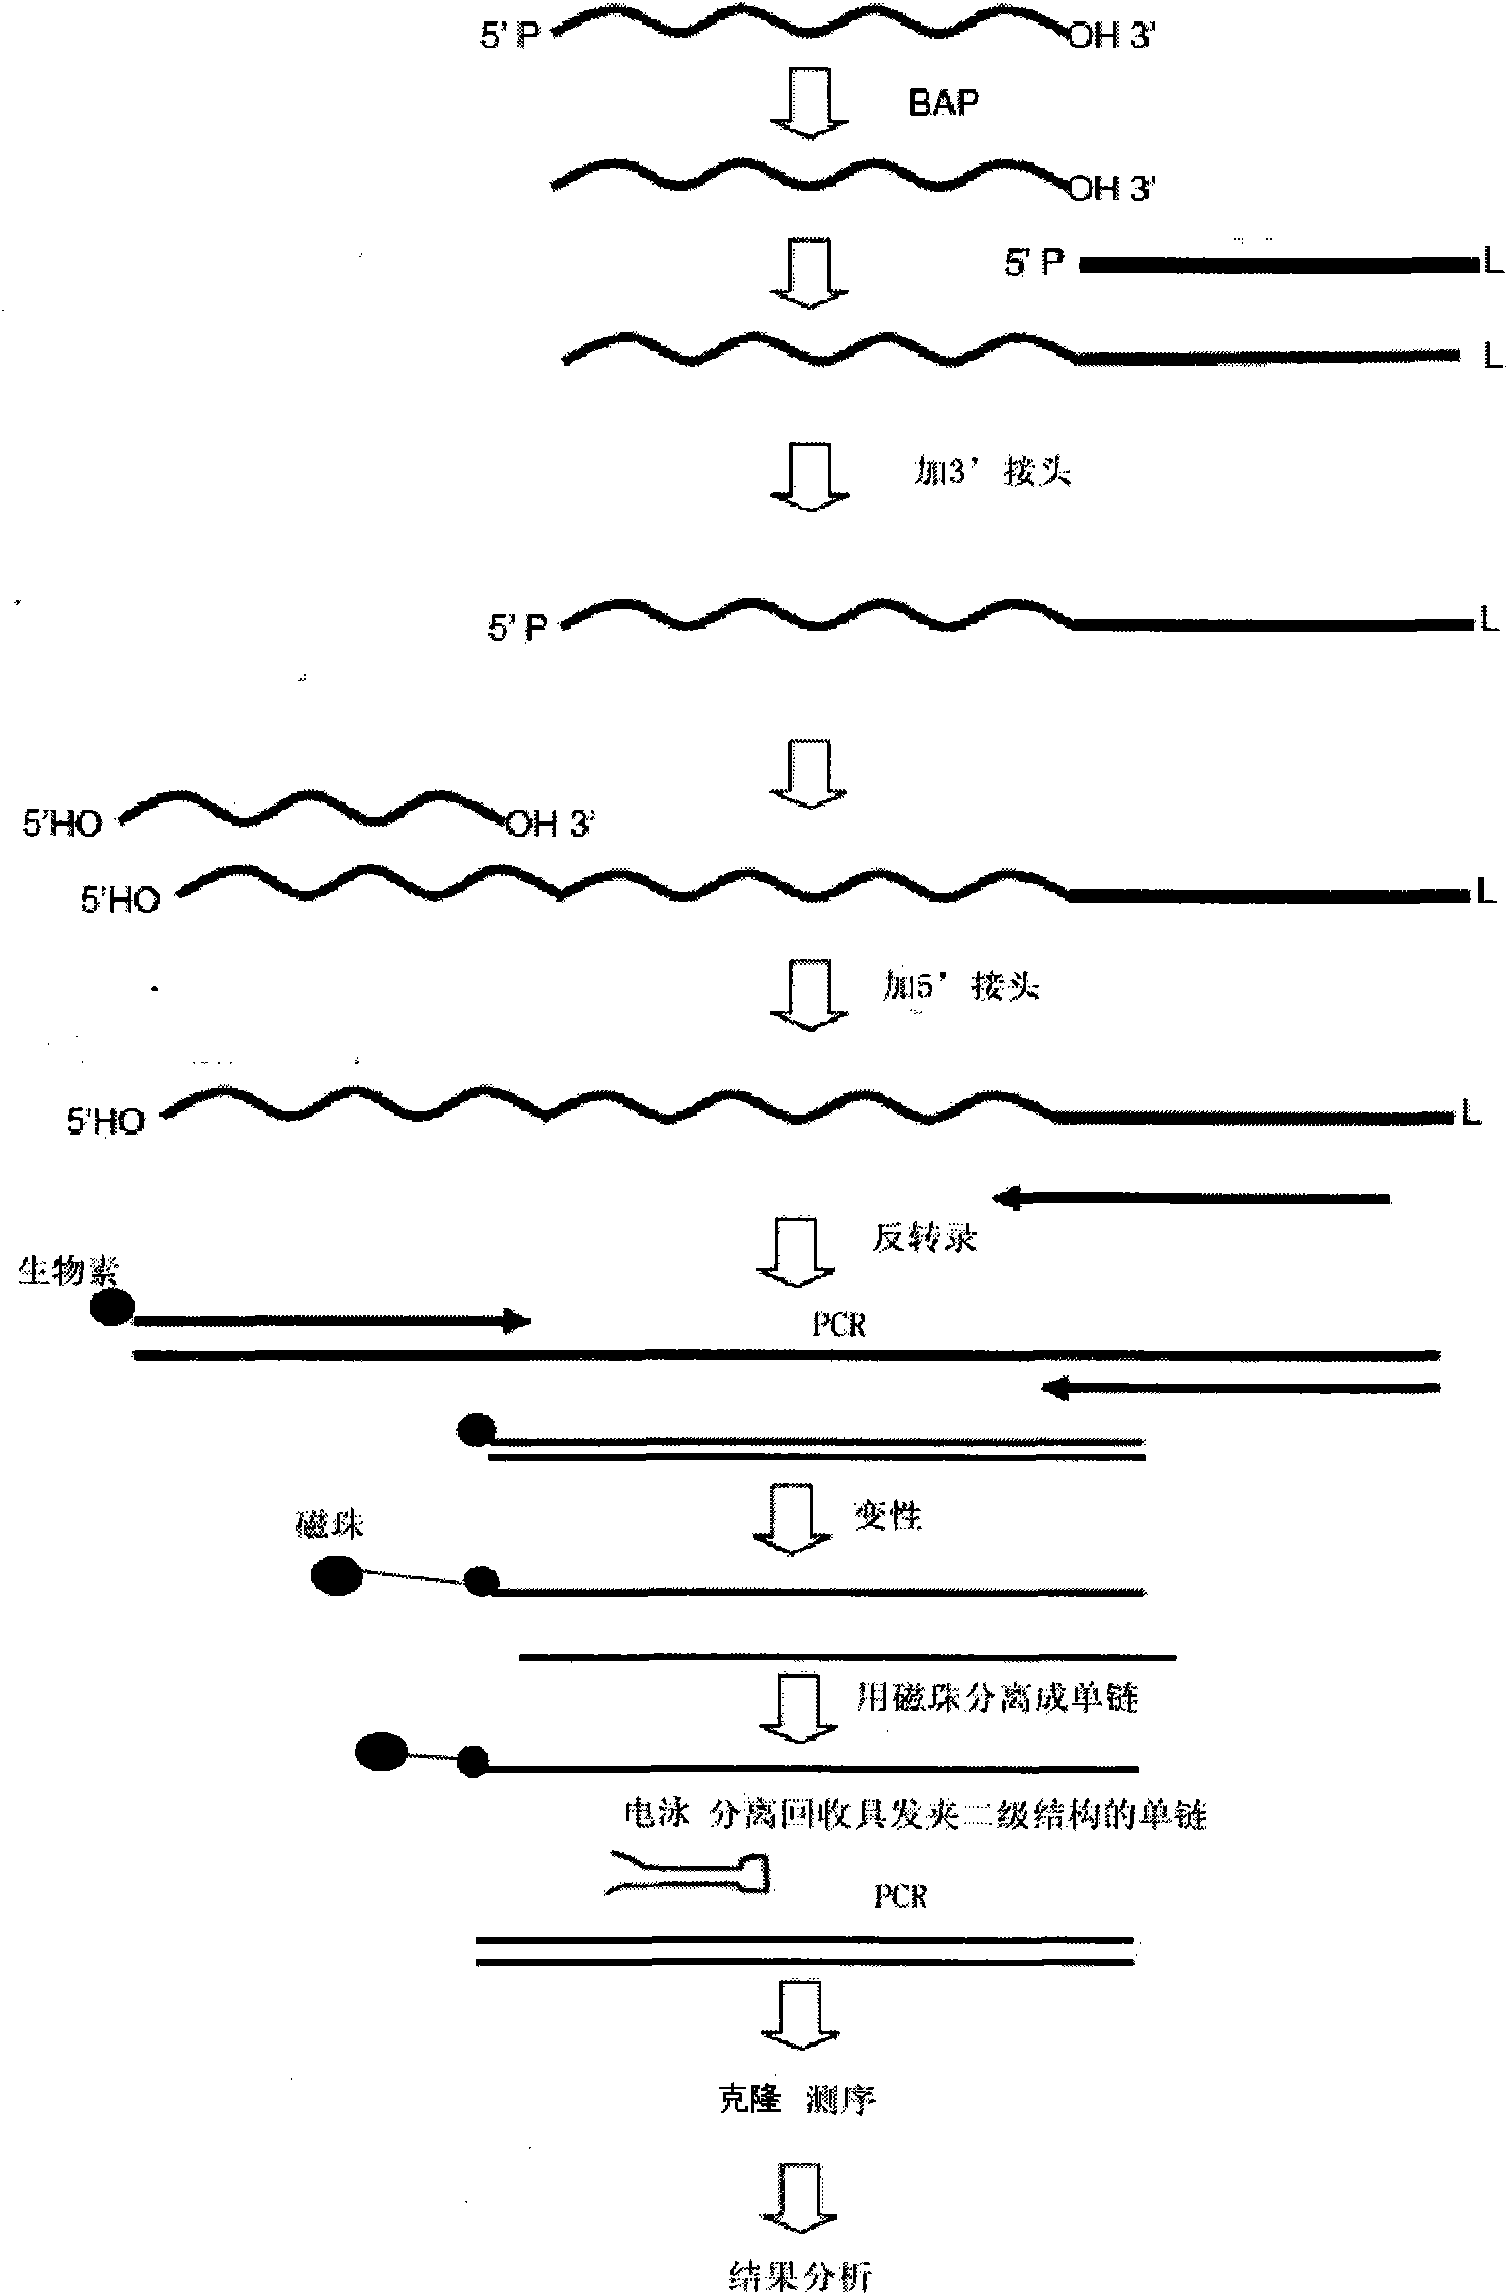 Method for extracting microRNA precursor cDNA from cDNA library synthesized from small RNA